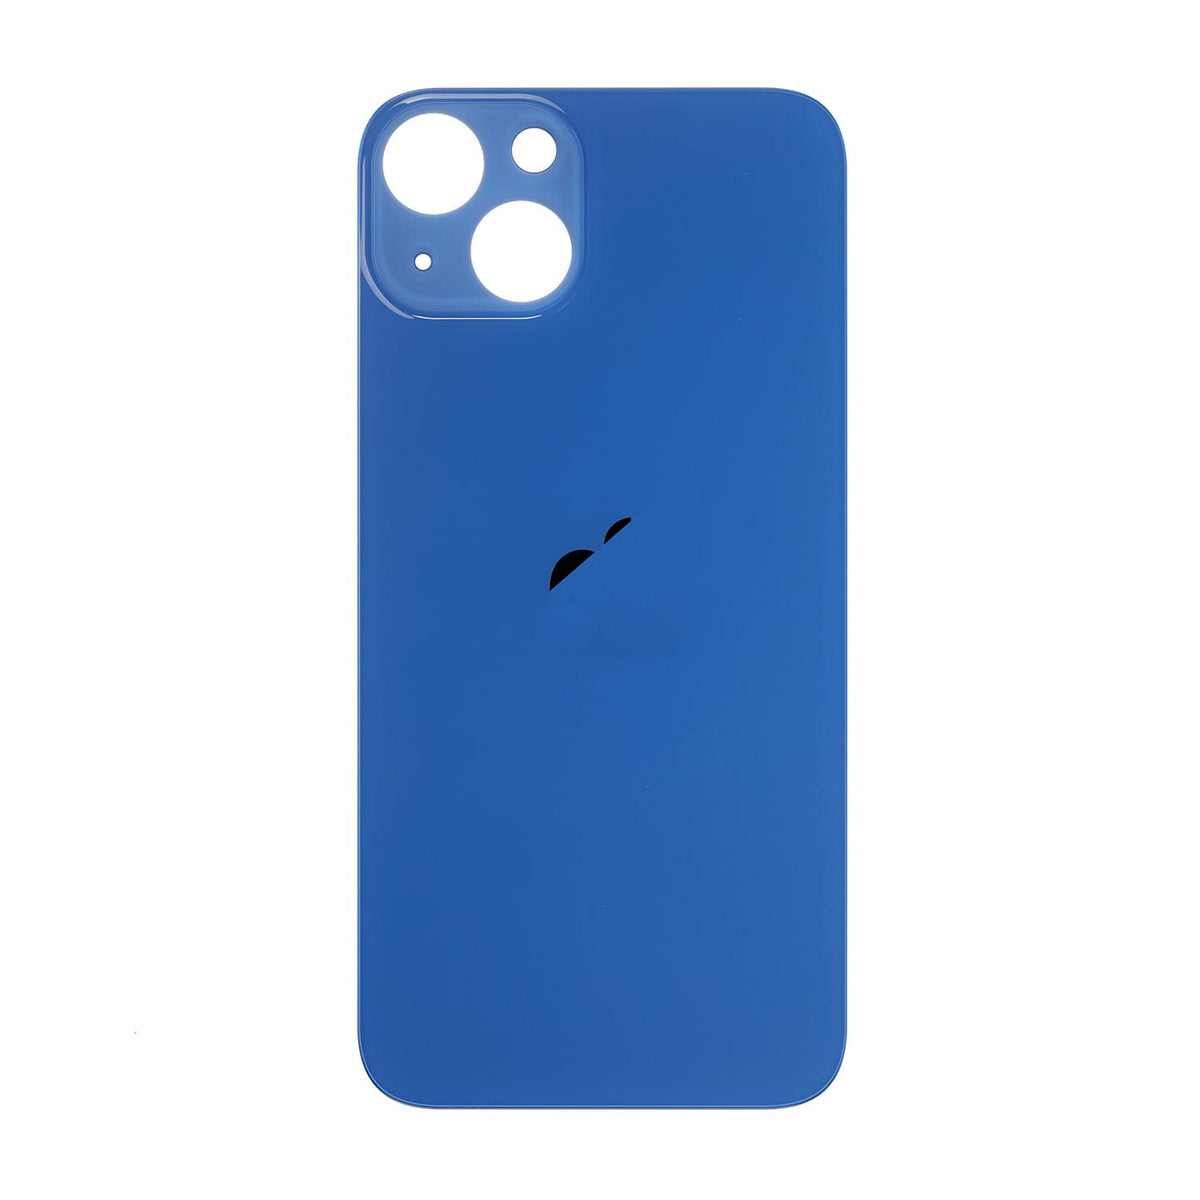 BLUE BACK COVER GLASS FOR IPHONE 13 MINI